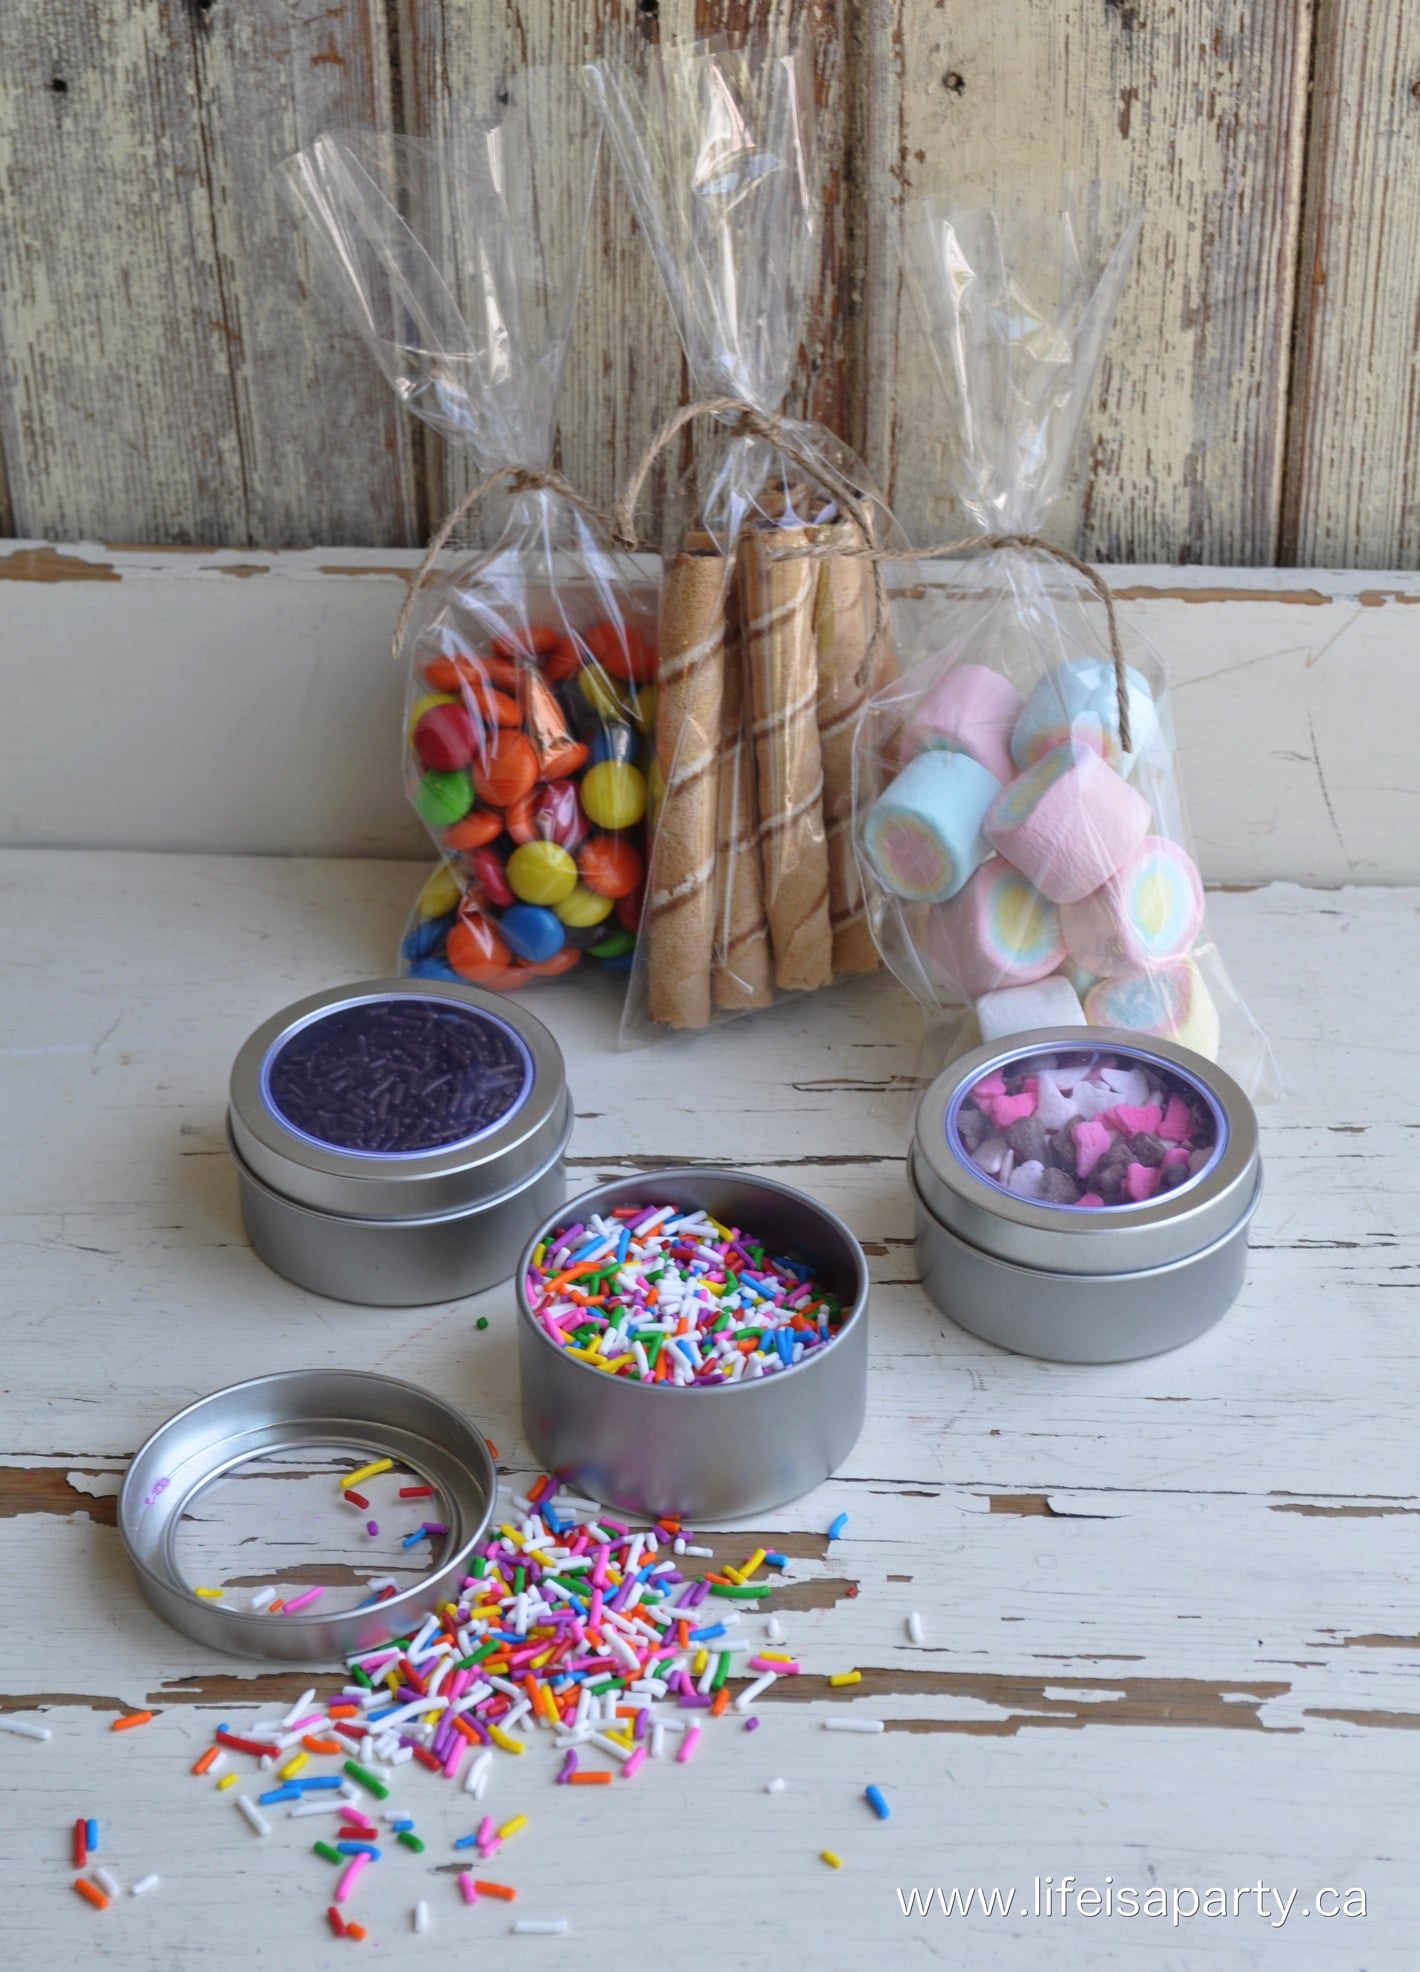 Ice cream sundae kit sprinkles, candies, marshmallows, and wafer cookies